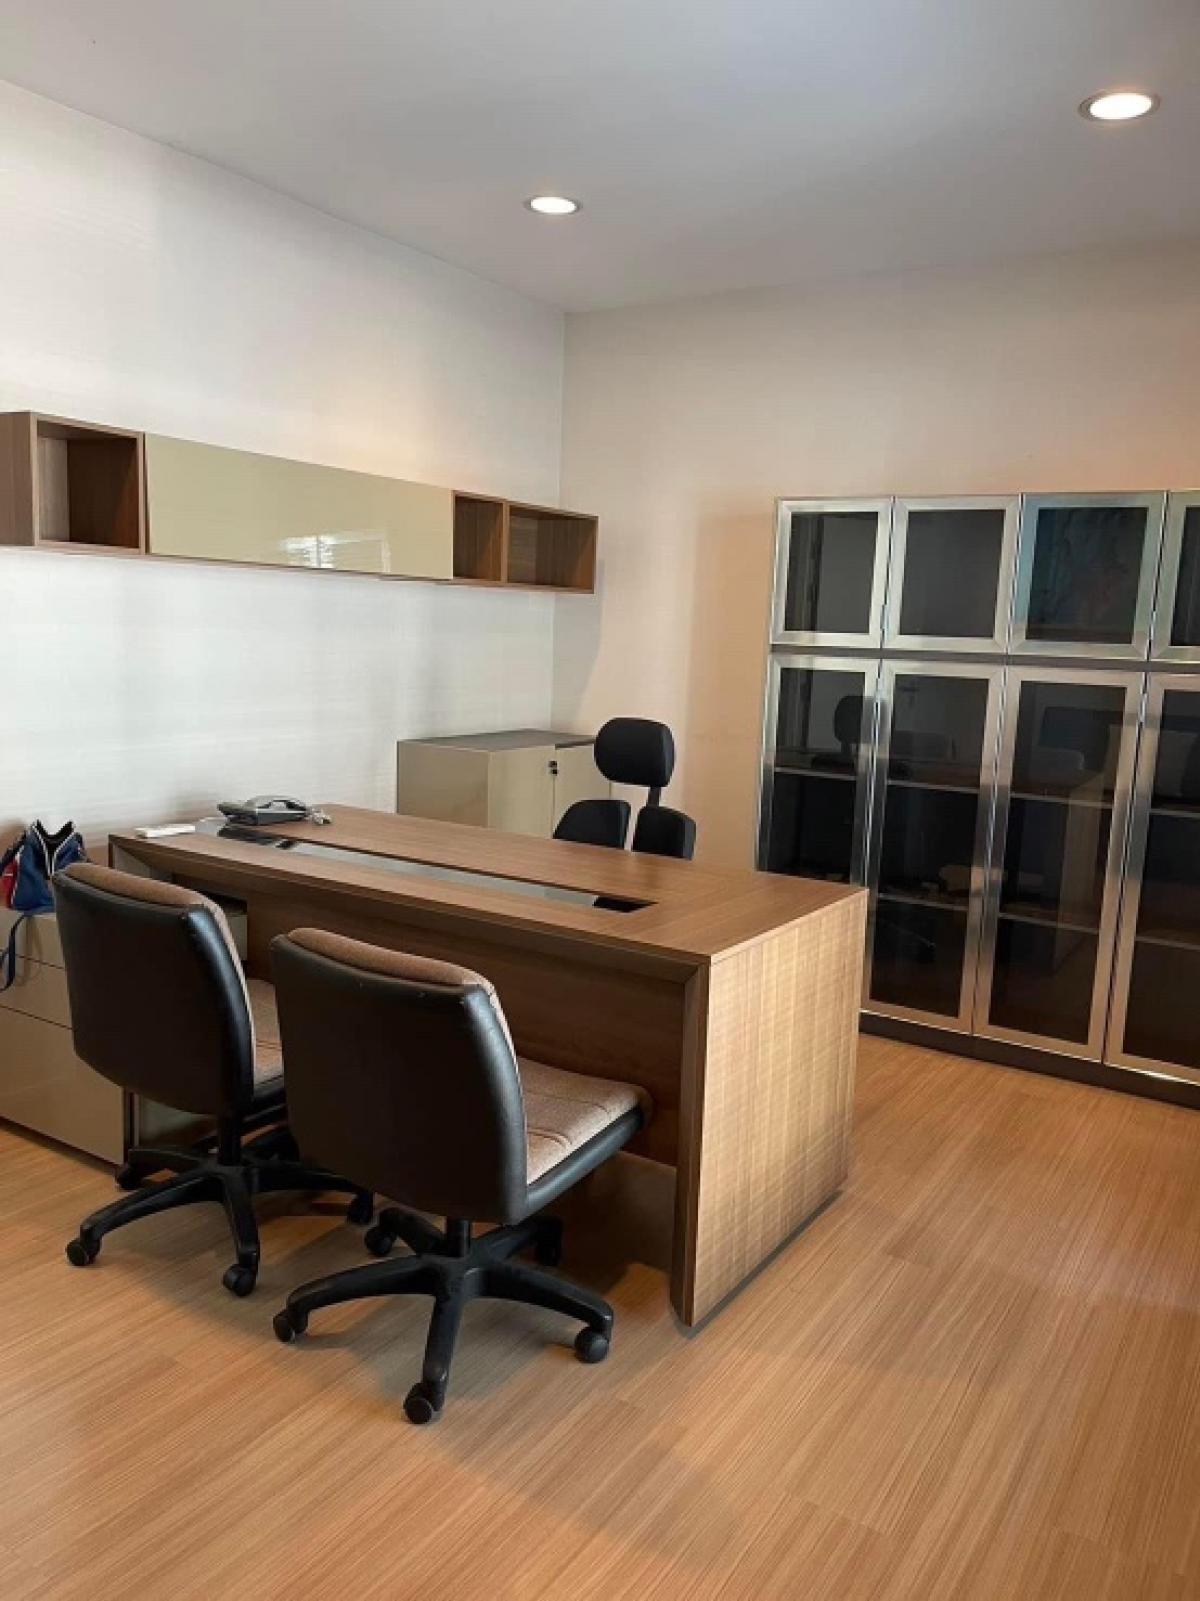 For RentTownhouseRamkhamhaeng, Hua Mak : Townhome for rent in the middle of the city, Rama 9, Ramkhamhaeng  for use as an office or for living  Corner room, area 27 sq m, 3 storey house, usable area 165 sq m